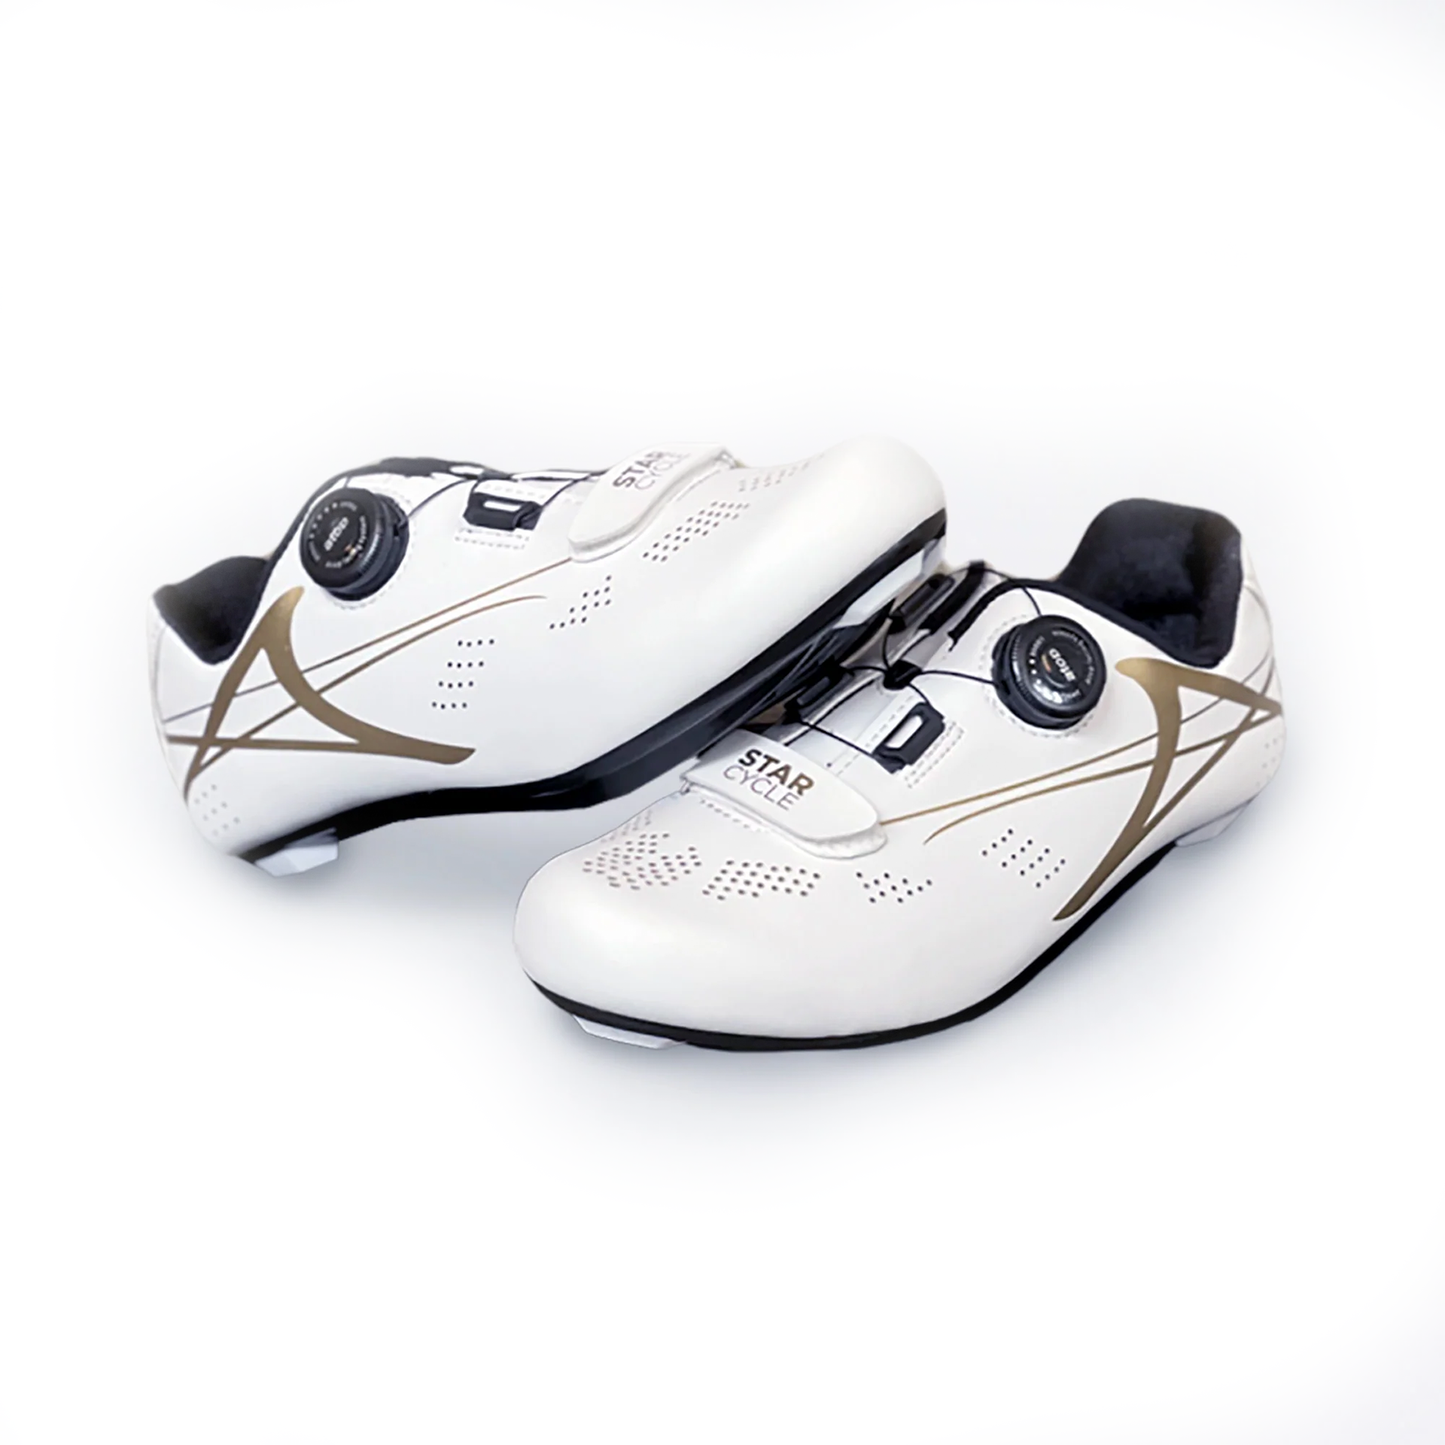 StarCycle Indoor Cycling Shoe